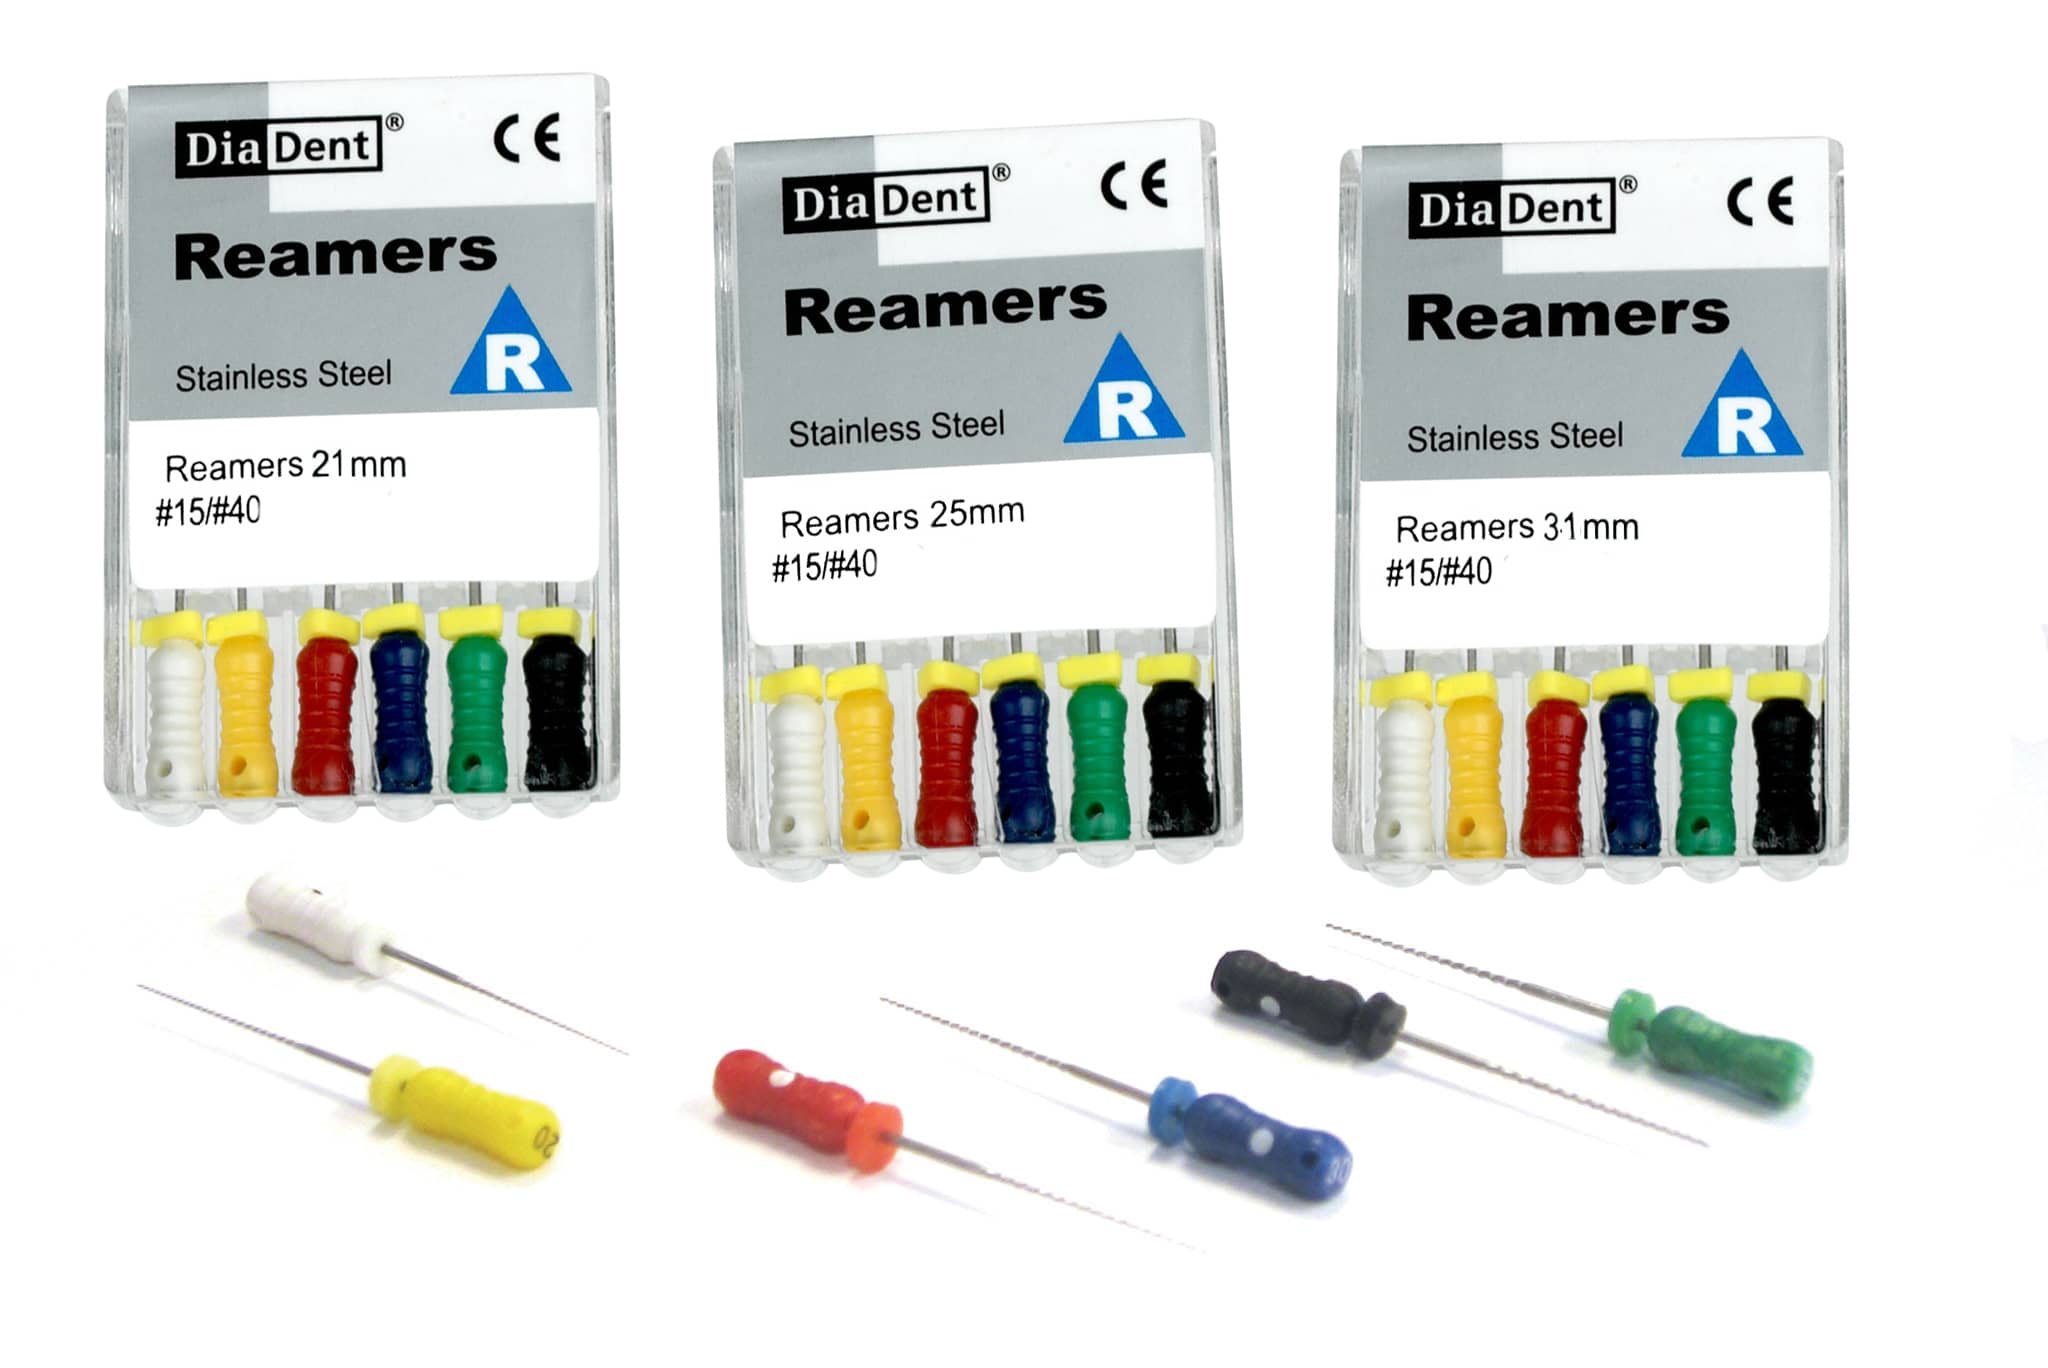 REAMERS Diadent 31mm - 08